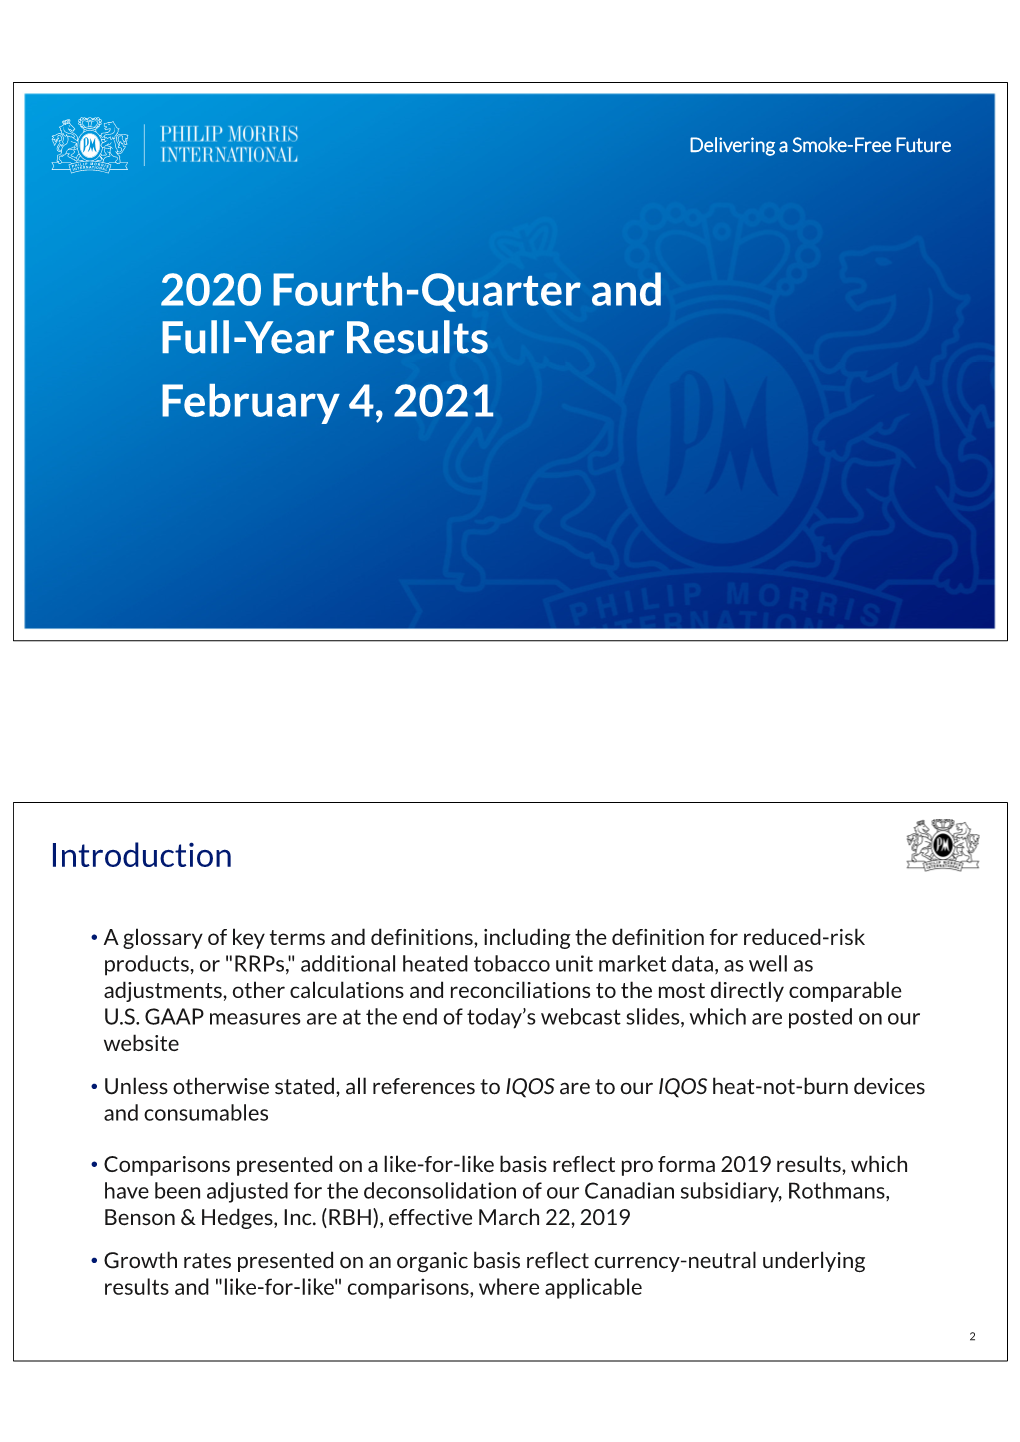 2020 Fourth-Quarter and Full-Year Results February 4, 2021